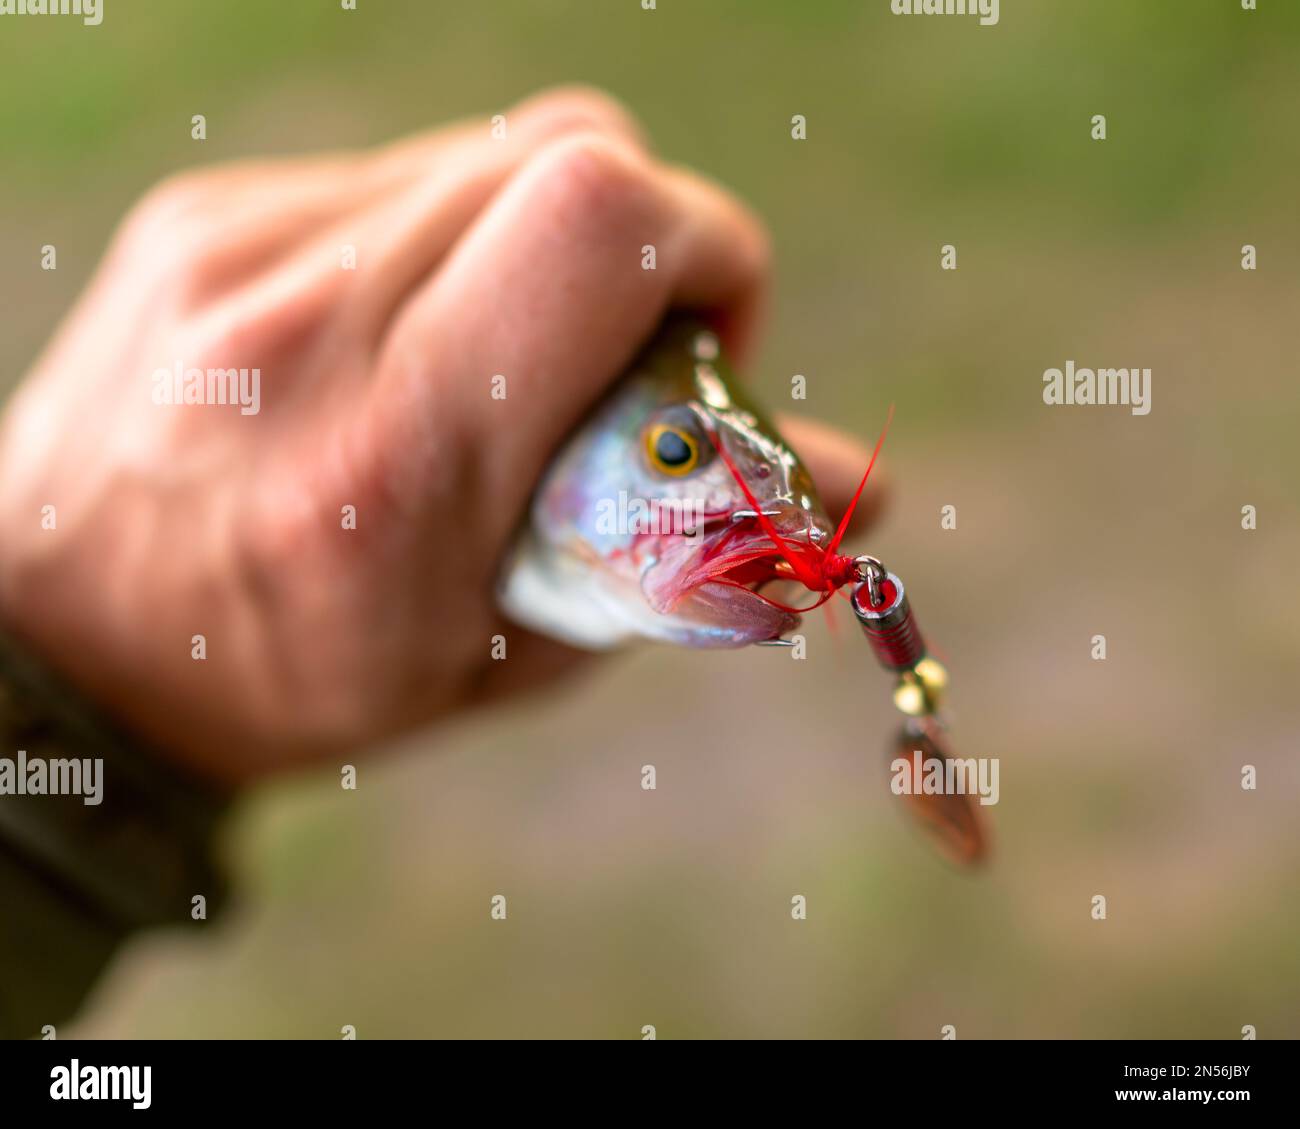 The red tail on the triple hook of the fishing lure of the spinner protrudes from the mouth of the caught perch fish clutched in the hand of the angle Stock Photo